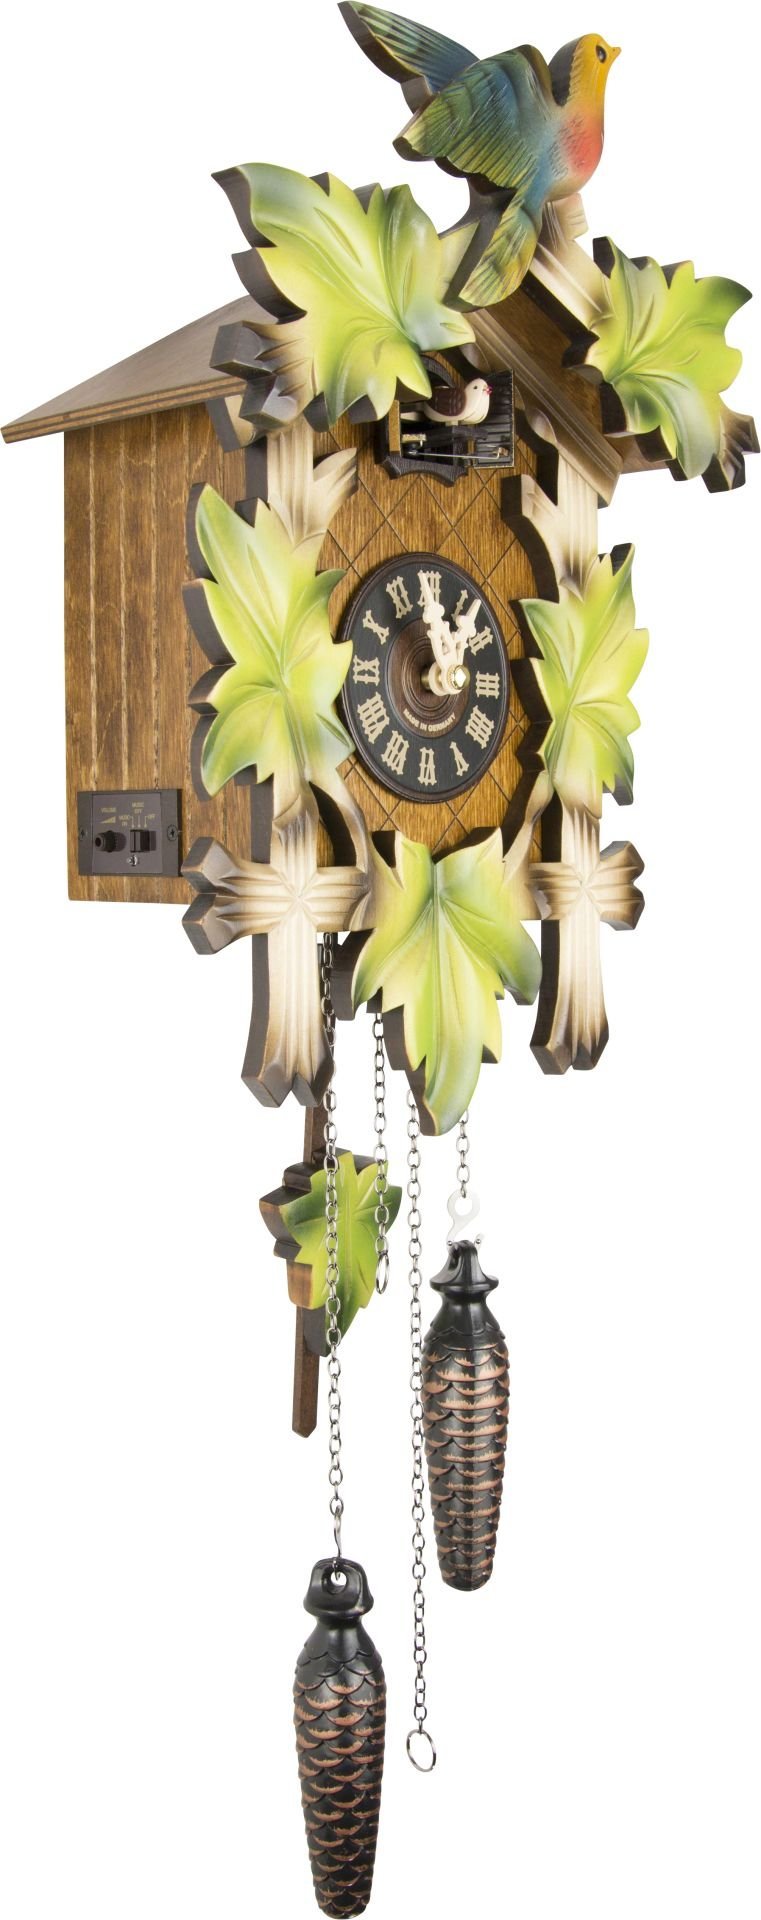 Cuckoo Clock Carved Style Quartz Movement 40cm by Engstler